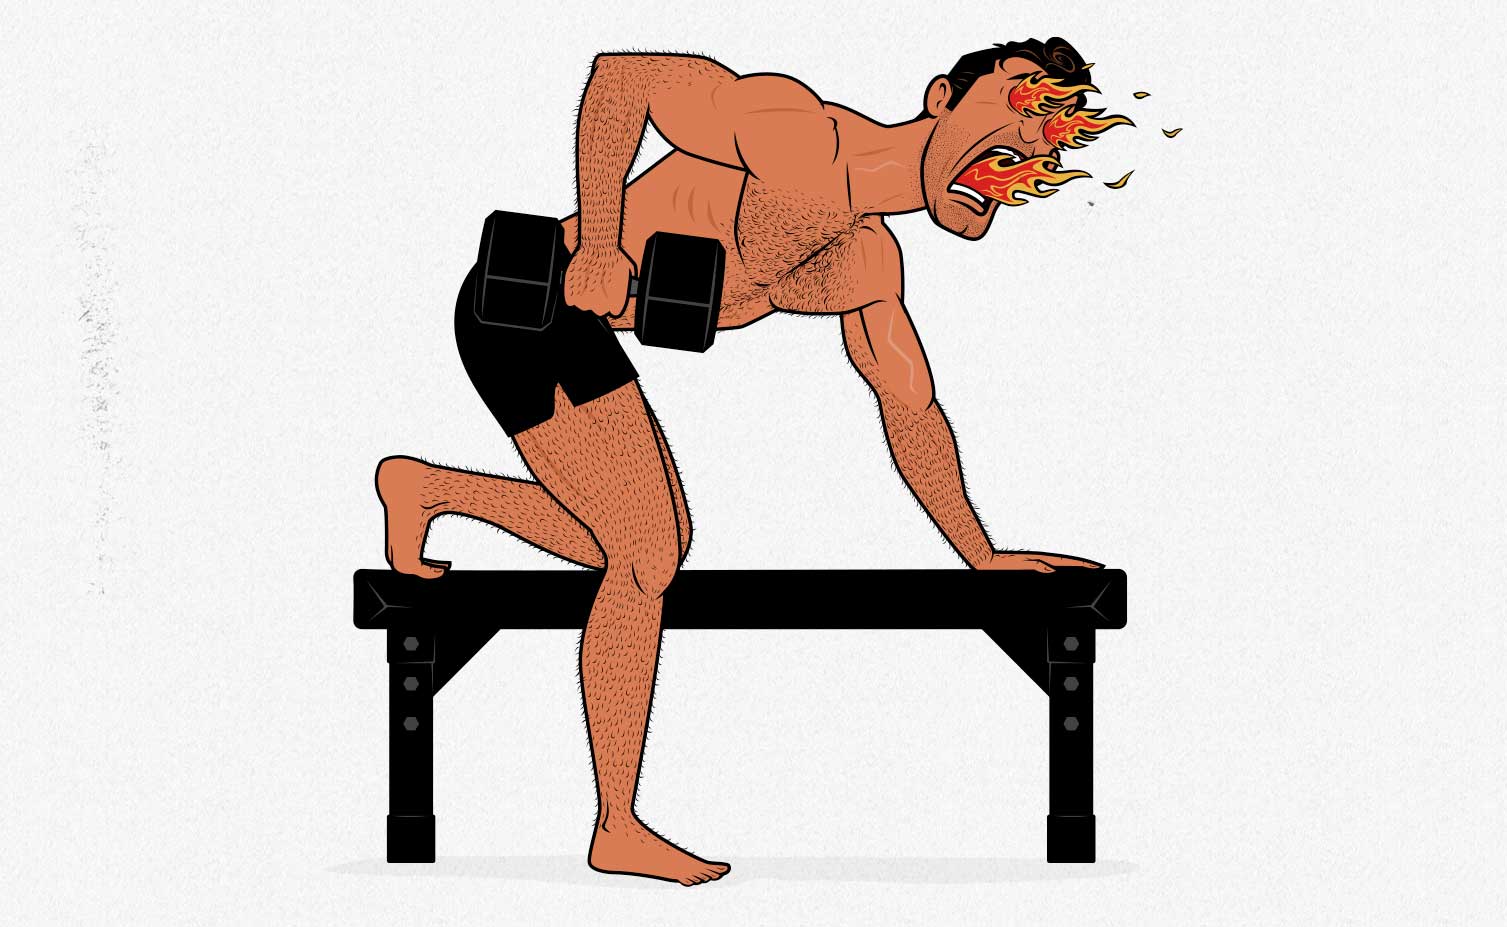 Illustration of a man getting a hernia from doing dumbbell rows with his knee up on a bench.